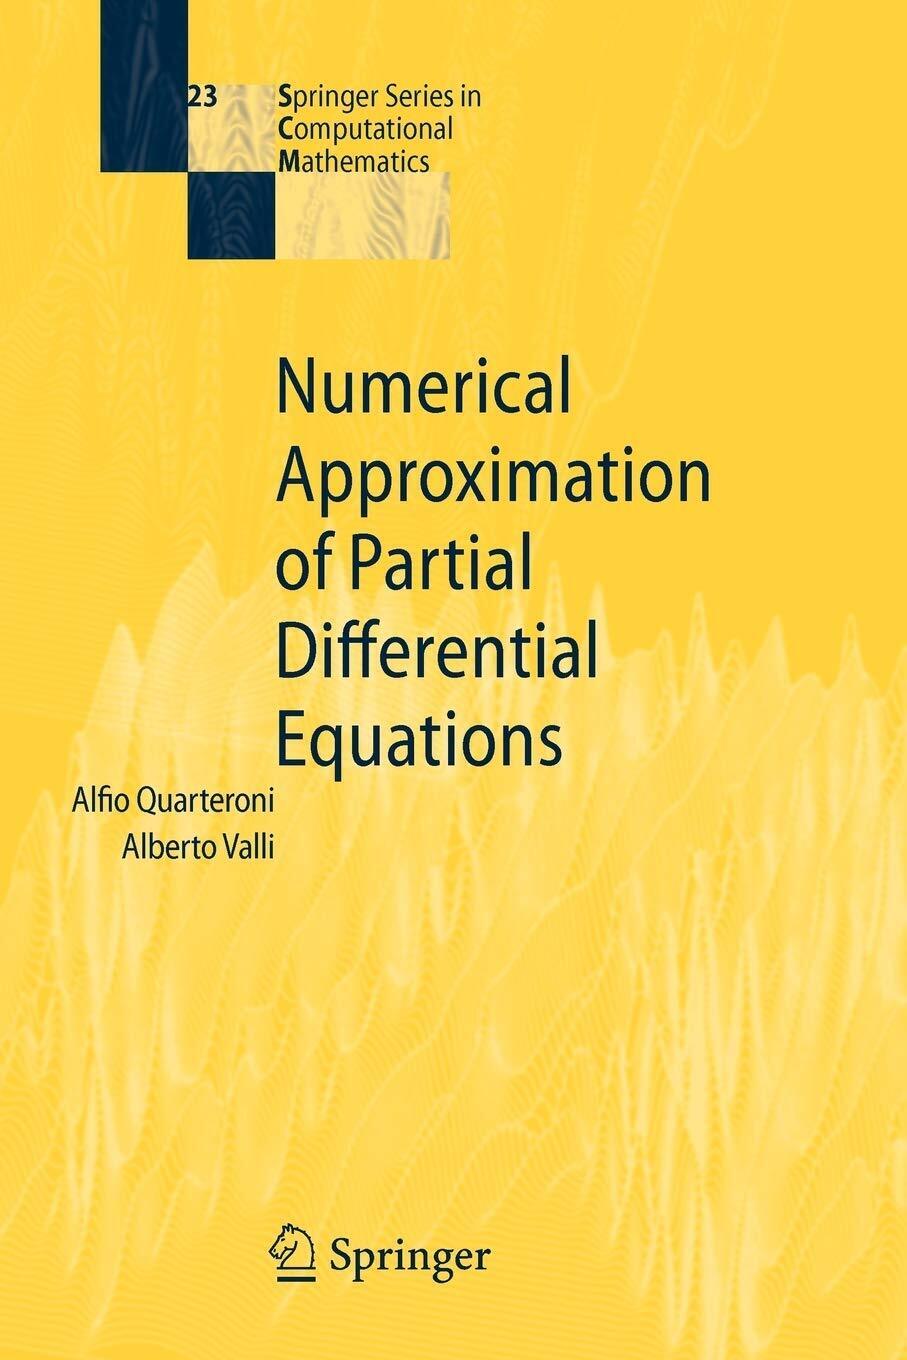 Numerical Approximation of Partial Differential Equations - Springer, 2008 libro usato